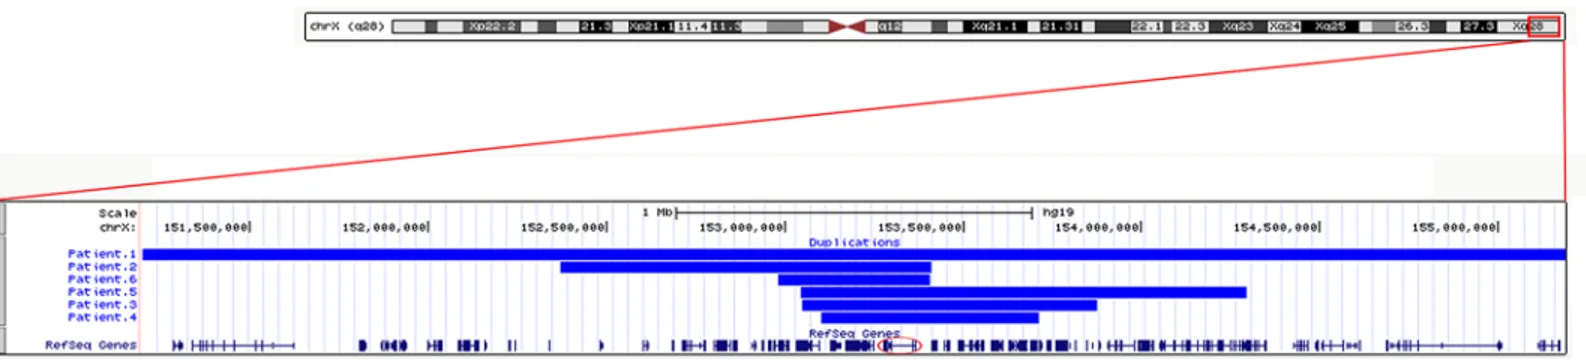 Fig 1. Graphical view of the MECP2 duplications/triplication. Graphical view of the MECP2 duplications/triplication was created with custom tracks in the UCSC genome browser (GRCh37/hg19), (Patient 1 was identified with a triplication)